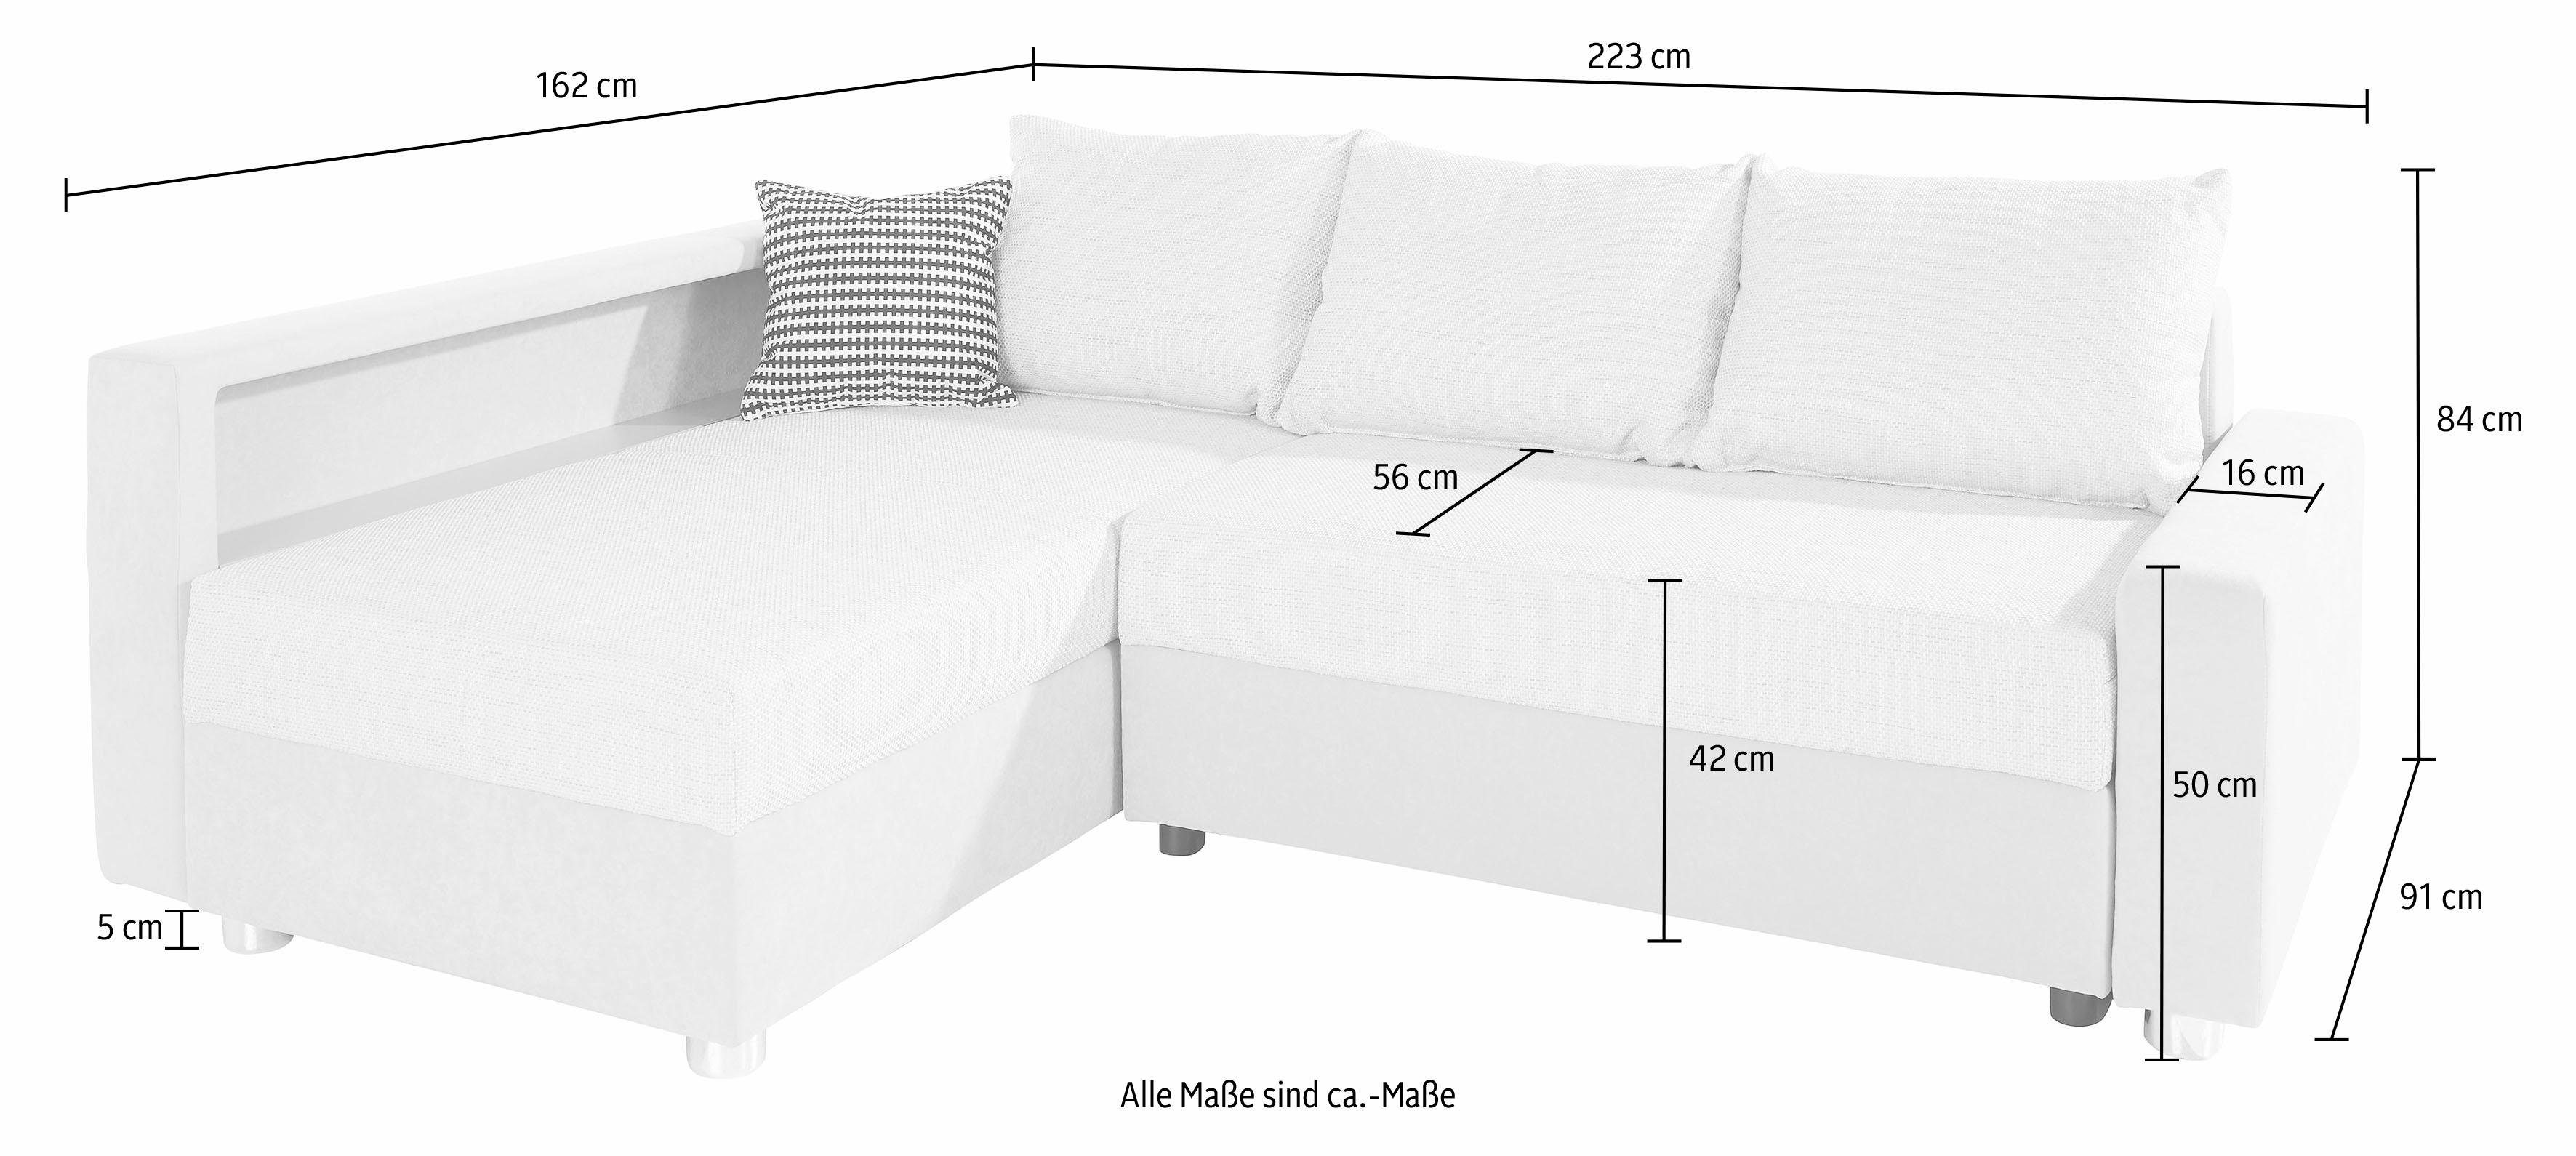 Ecksofa Federkern, Relax, Bettfunktion, RGB-LED-Beleuchtung inklusive COLLECTION wahlweise mit AB